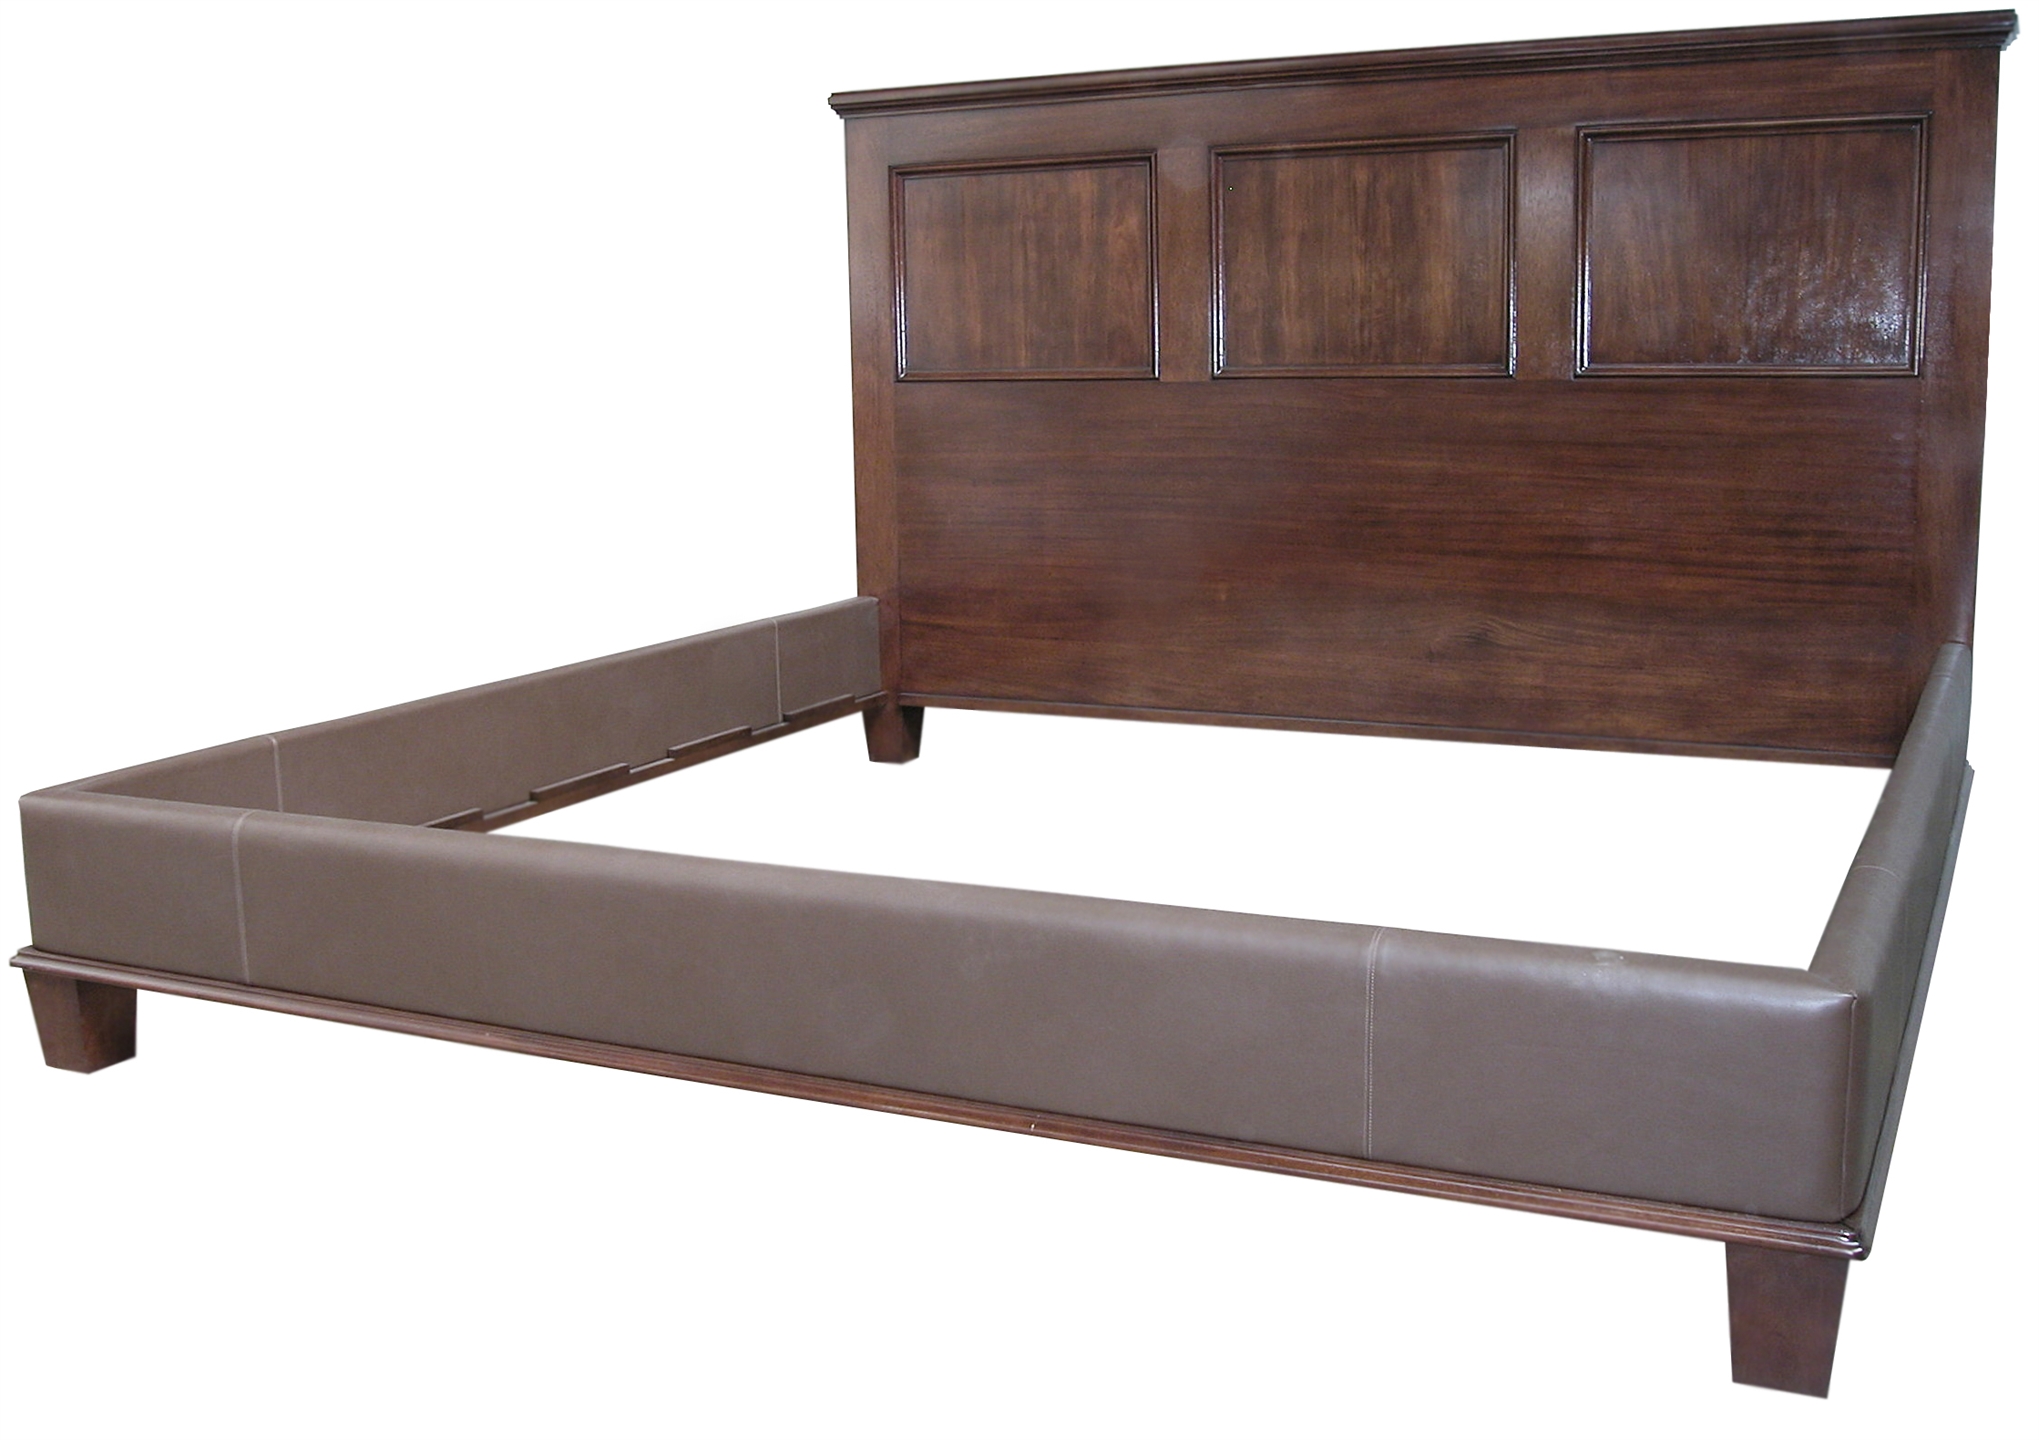 Paneled Wood and Leather Bed